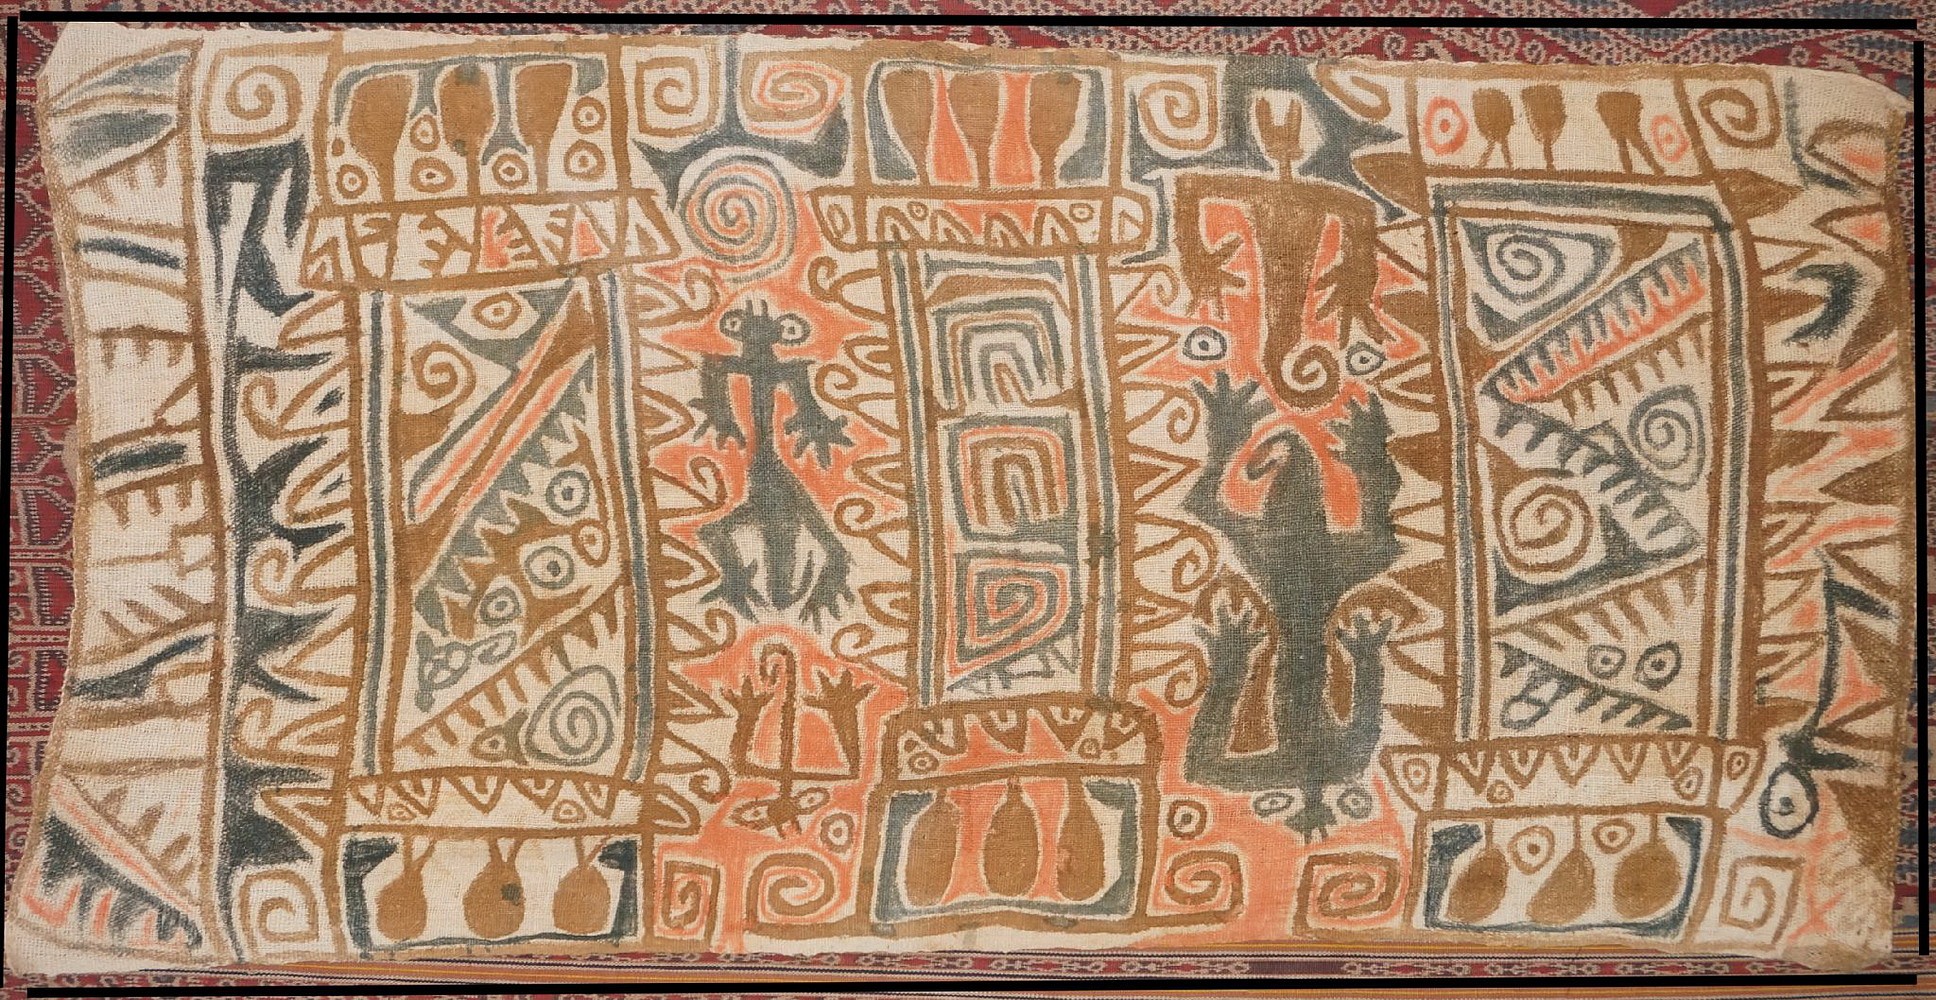 Peru, Chancay Painted Cotton Panel with Four Abstract Figures and Symbols
The cotton panel is painted in blue, tan and orange.  The drawing can be interpreted as 3 woven panels or tunics with fringes, each decorated with different abstract designs.  On each side of the central panel are two abstract creatures with curly tails on an orange ground.
Media: Textile
Dimensions: Length: 46" x Width: 23"
$7,500
n6056h